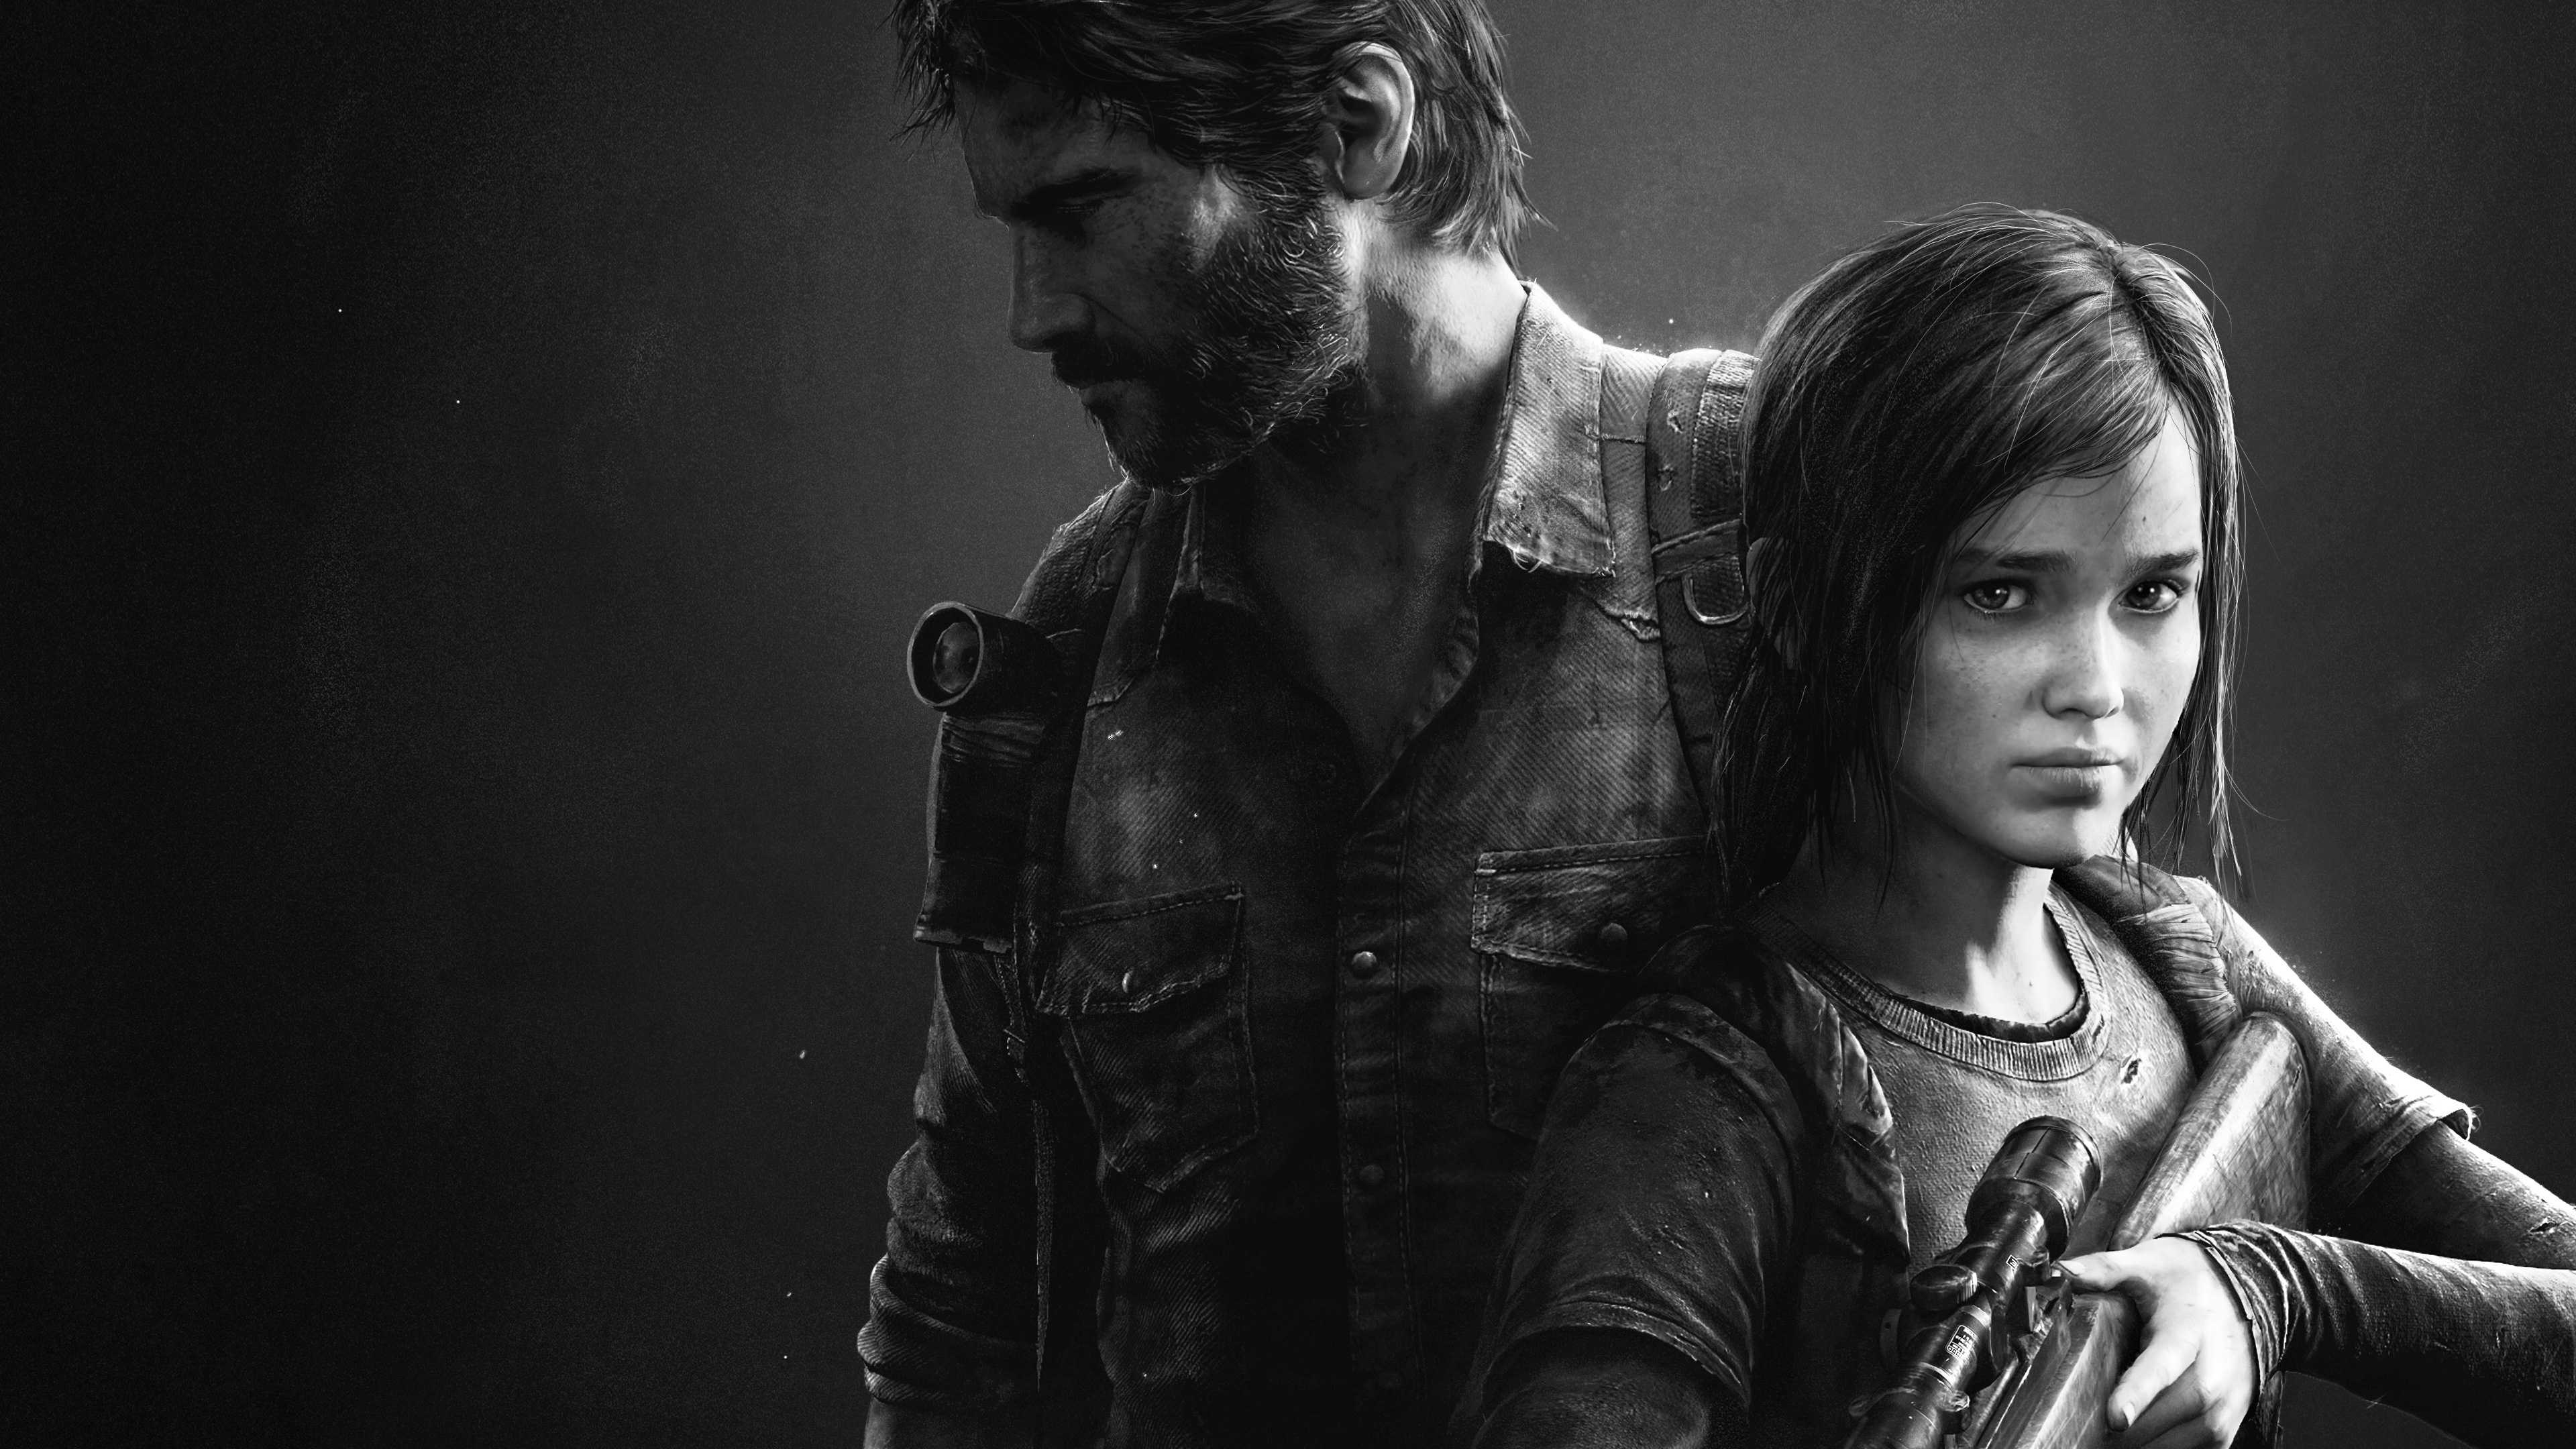 The Last of Us series star Bella Ramsey describes what it's like to work with co-star Pedro Pascal